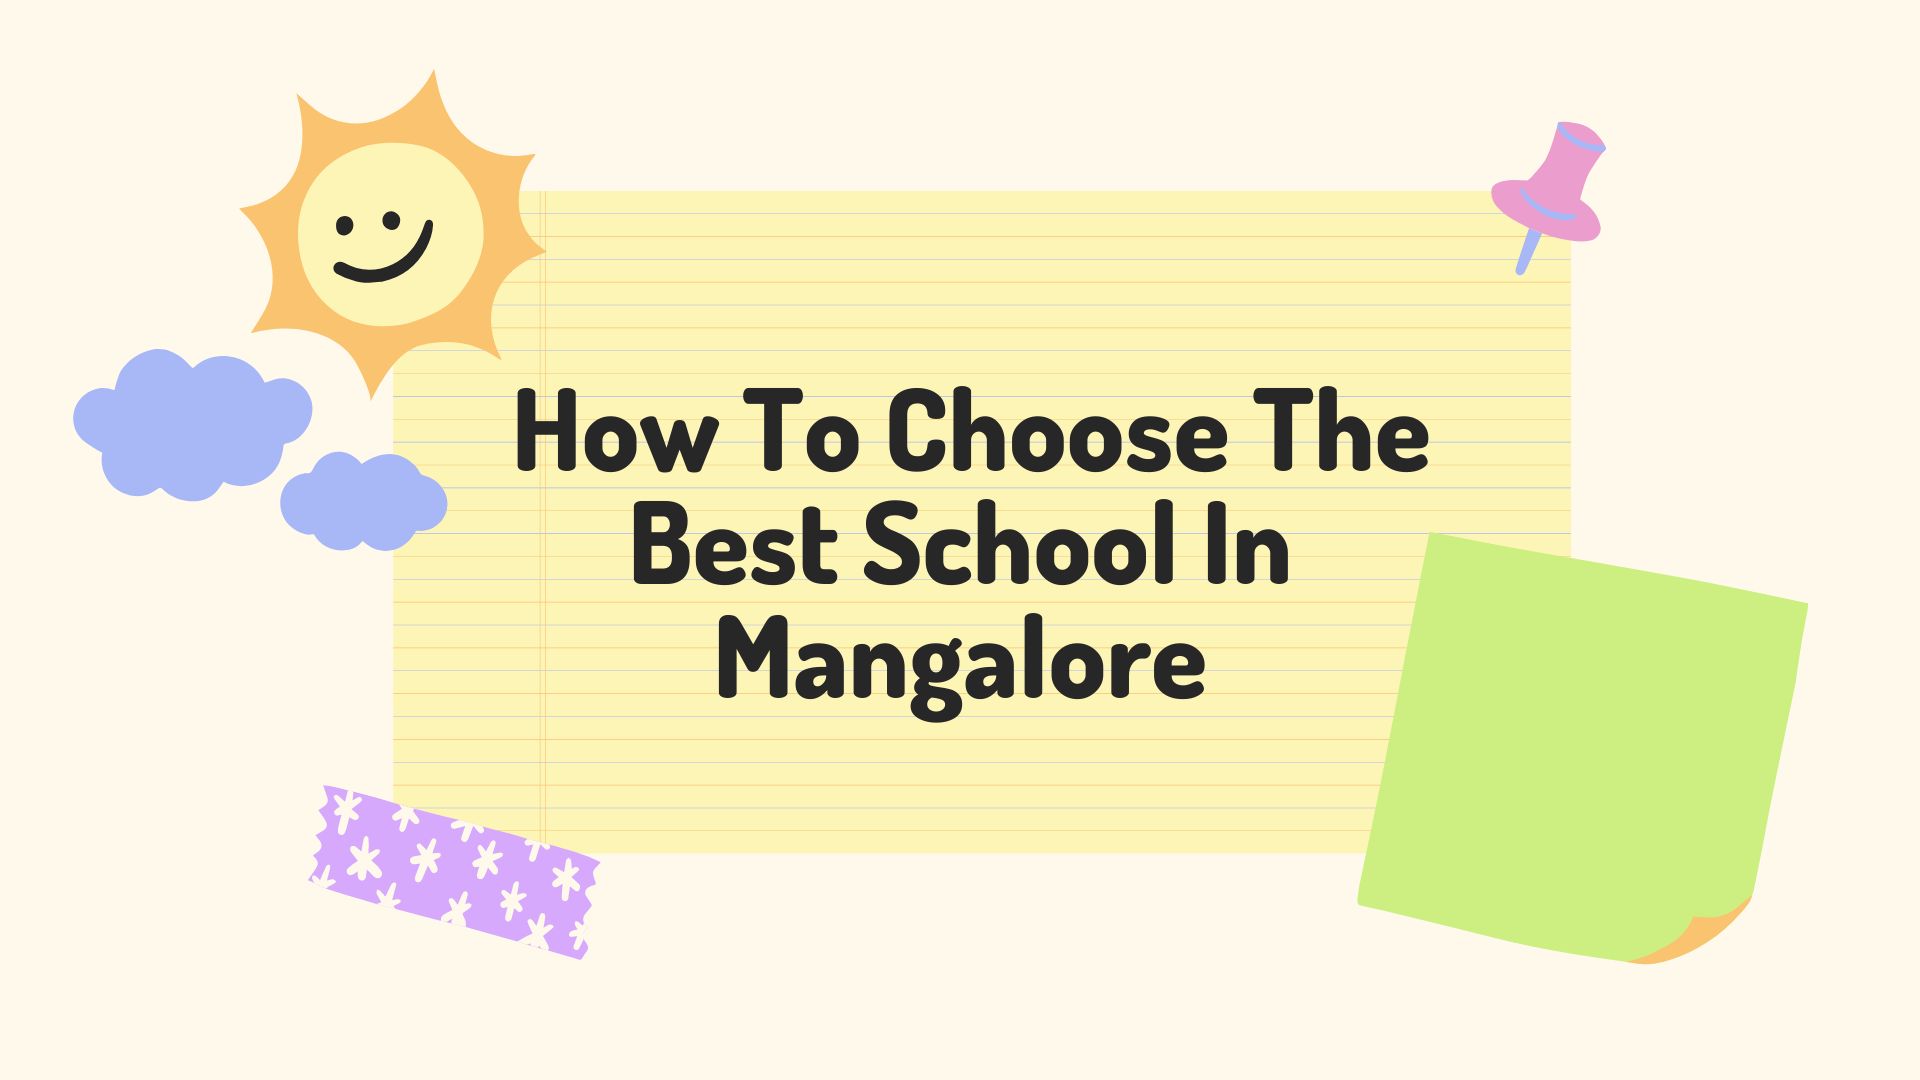 How To Choose The Best School In Mangalore